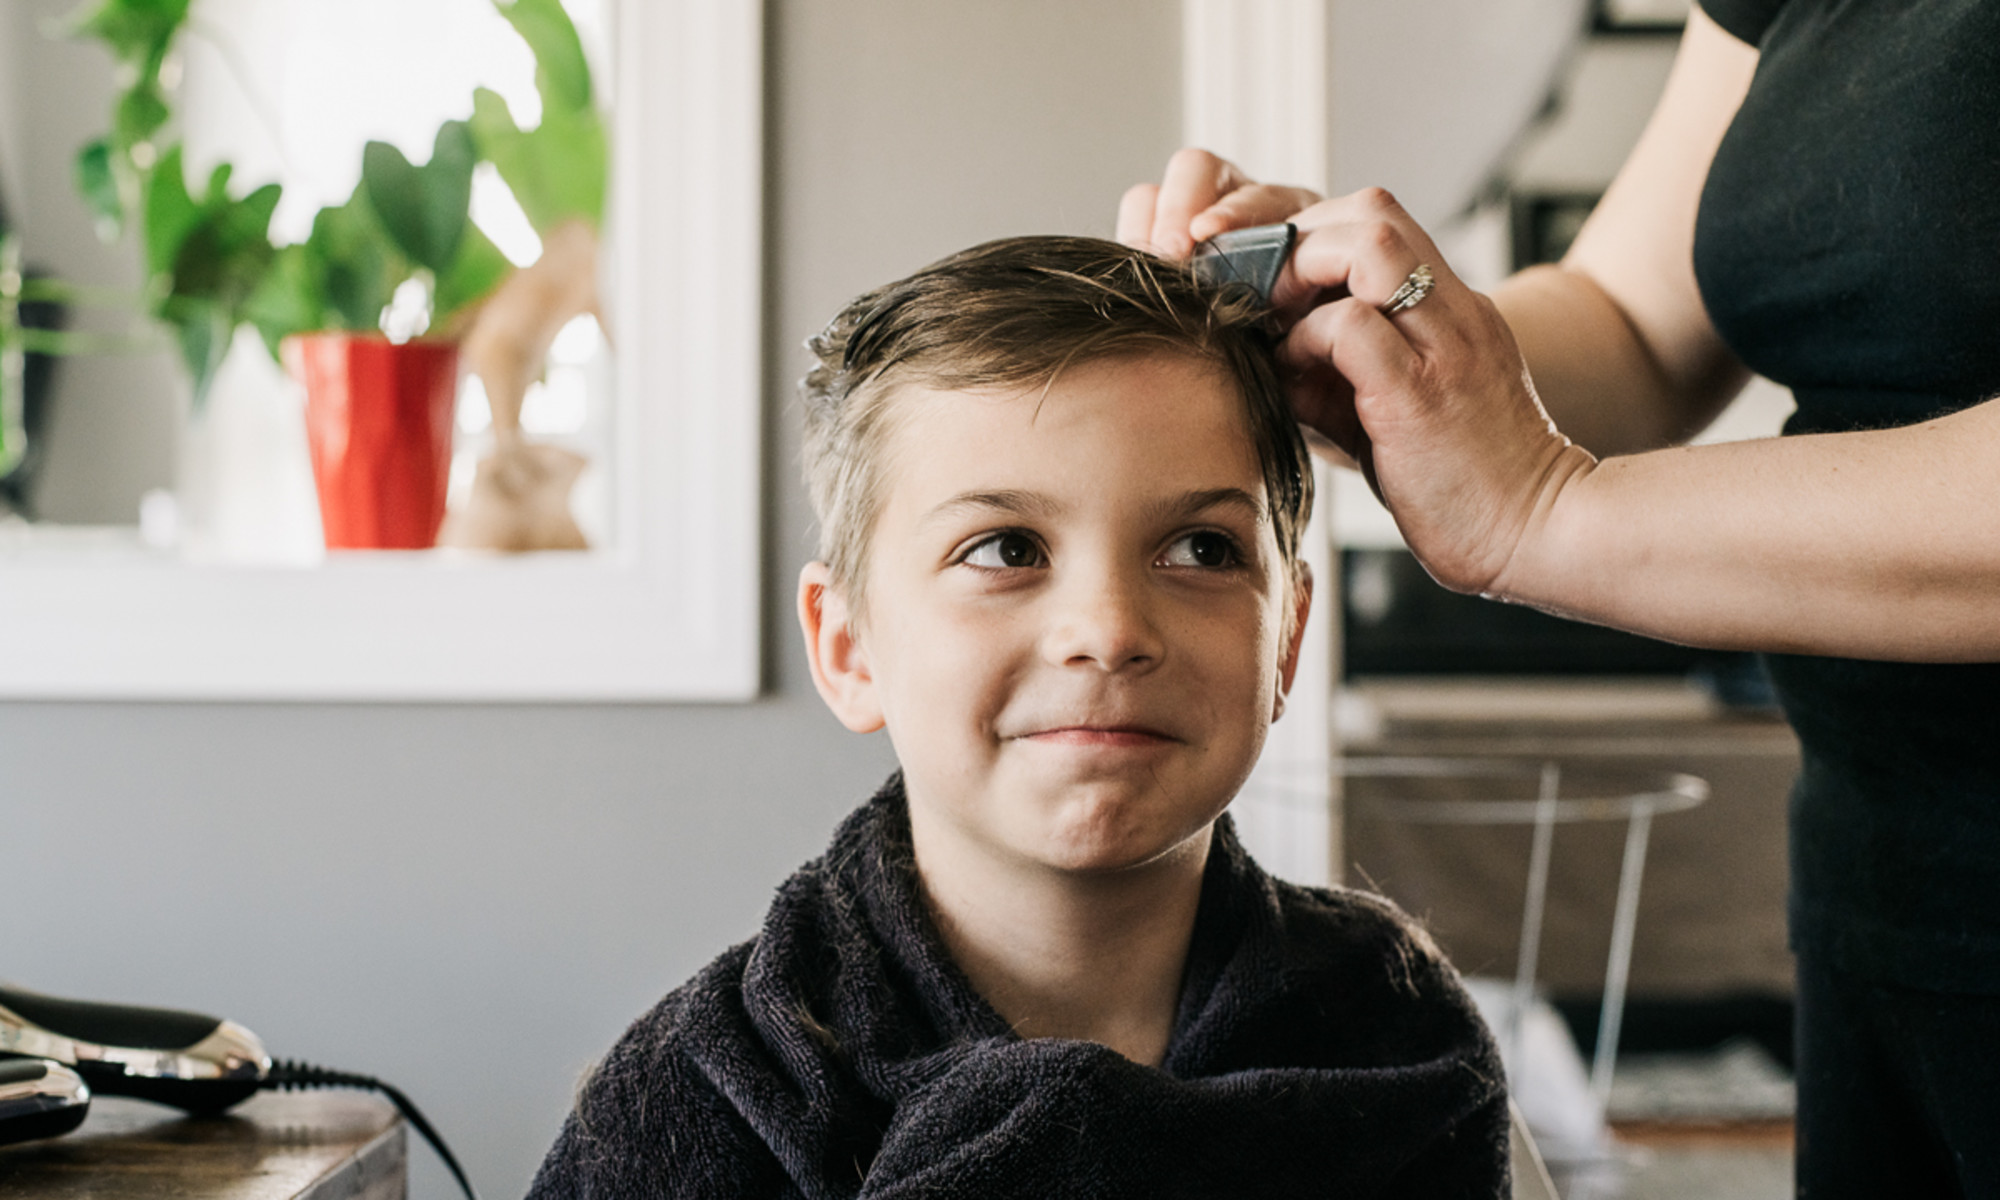 How To Cut Kids' Hair At Home: Easy Tips From Stylists | mindbodygreen